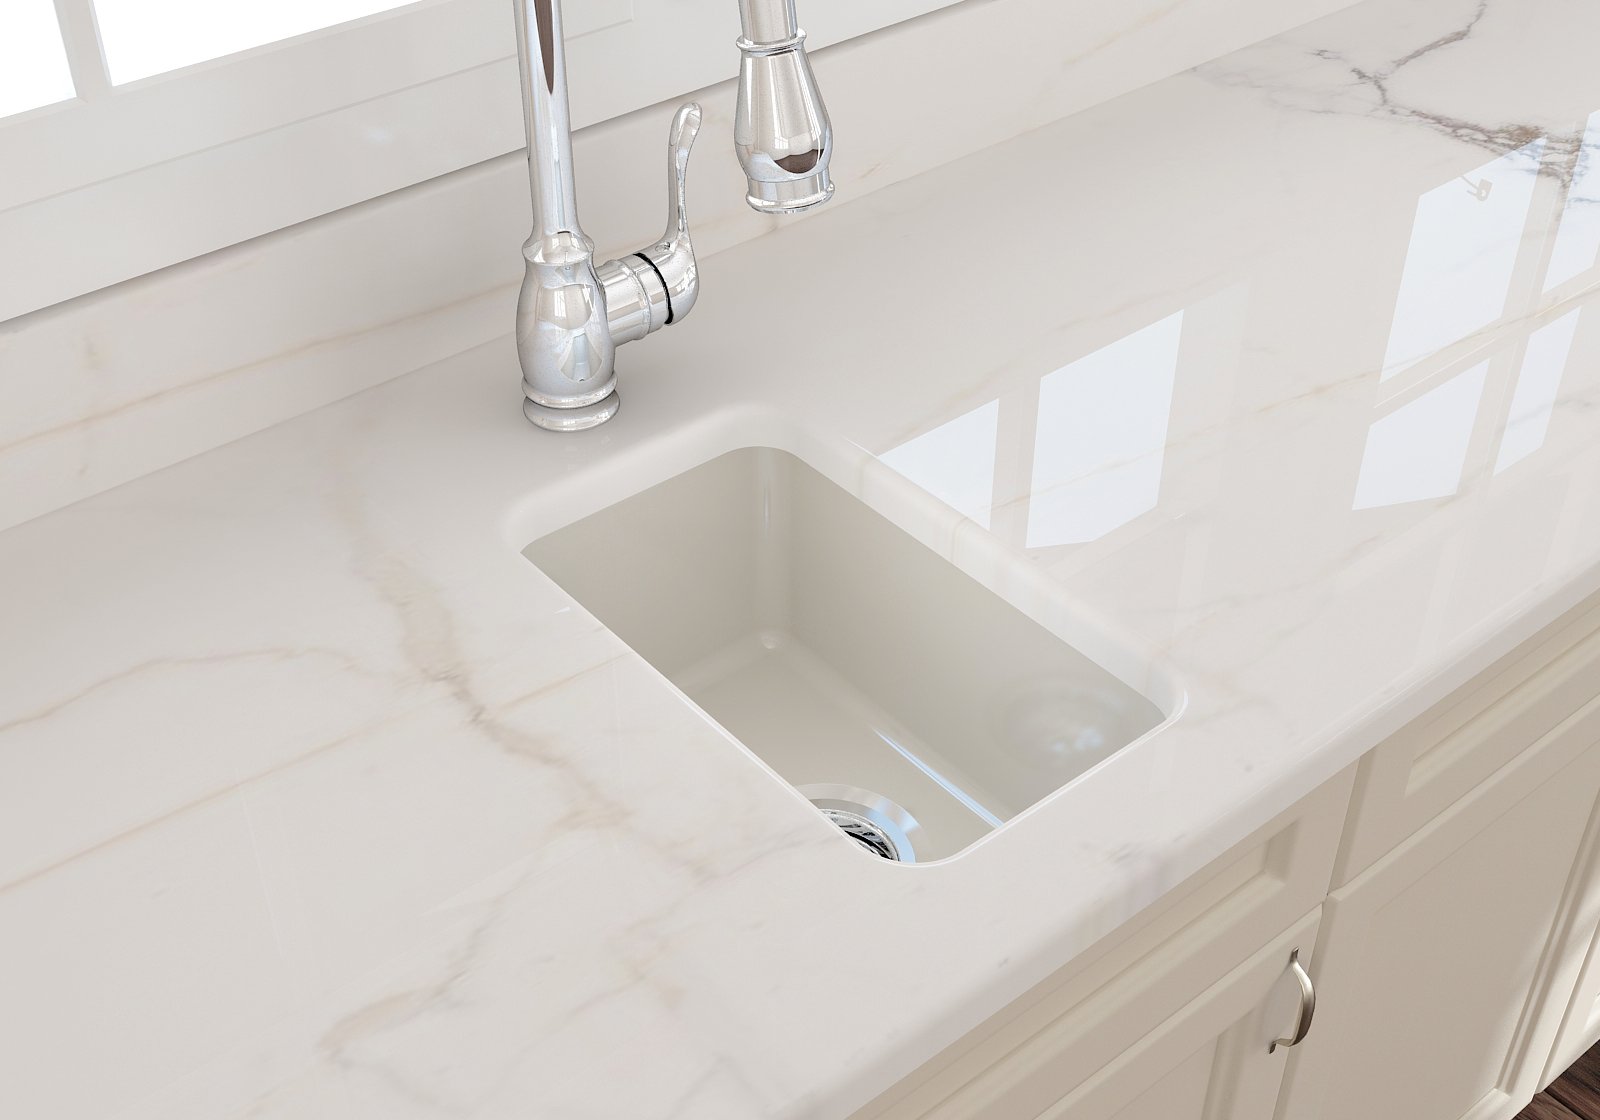 Bocchi Sotto Undermount Fireclay 12" Single Bowl Kitchen Sink with Strainer. Available in 9 Colors!